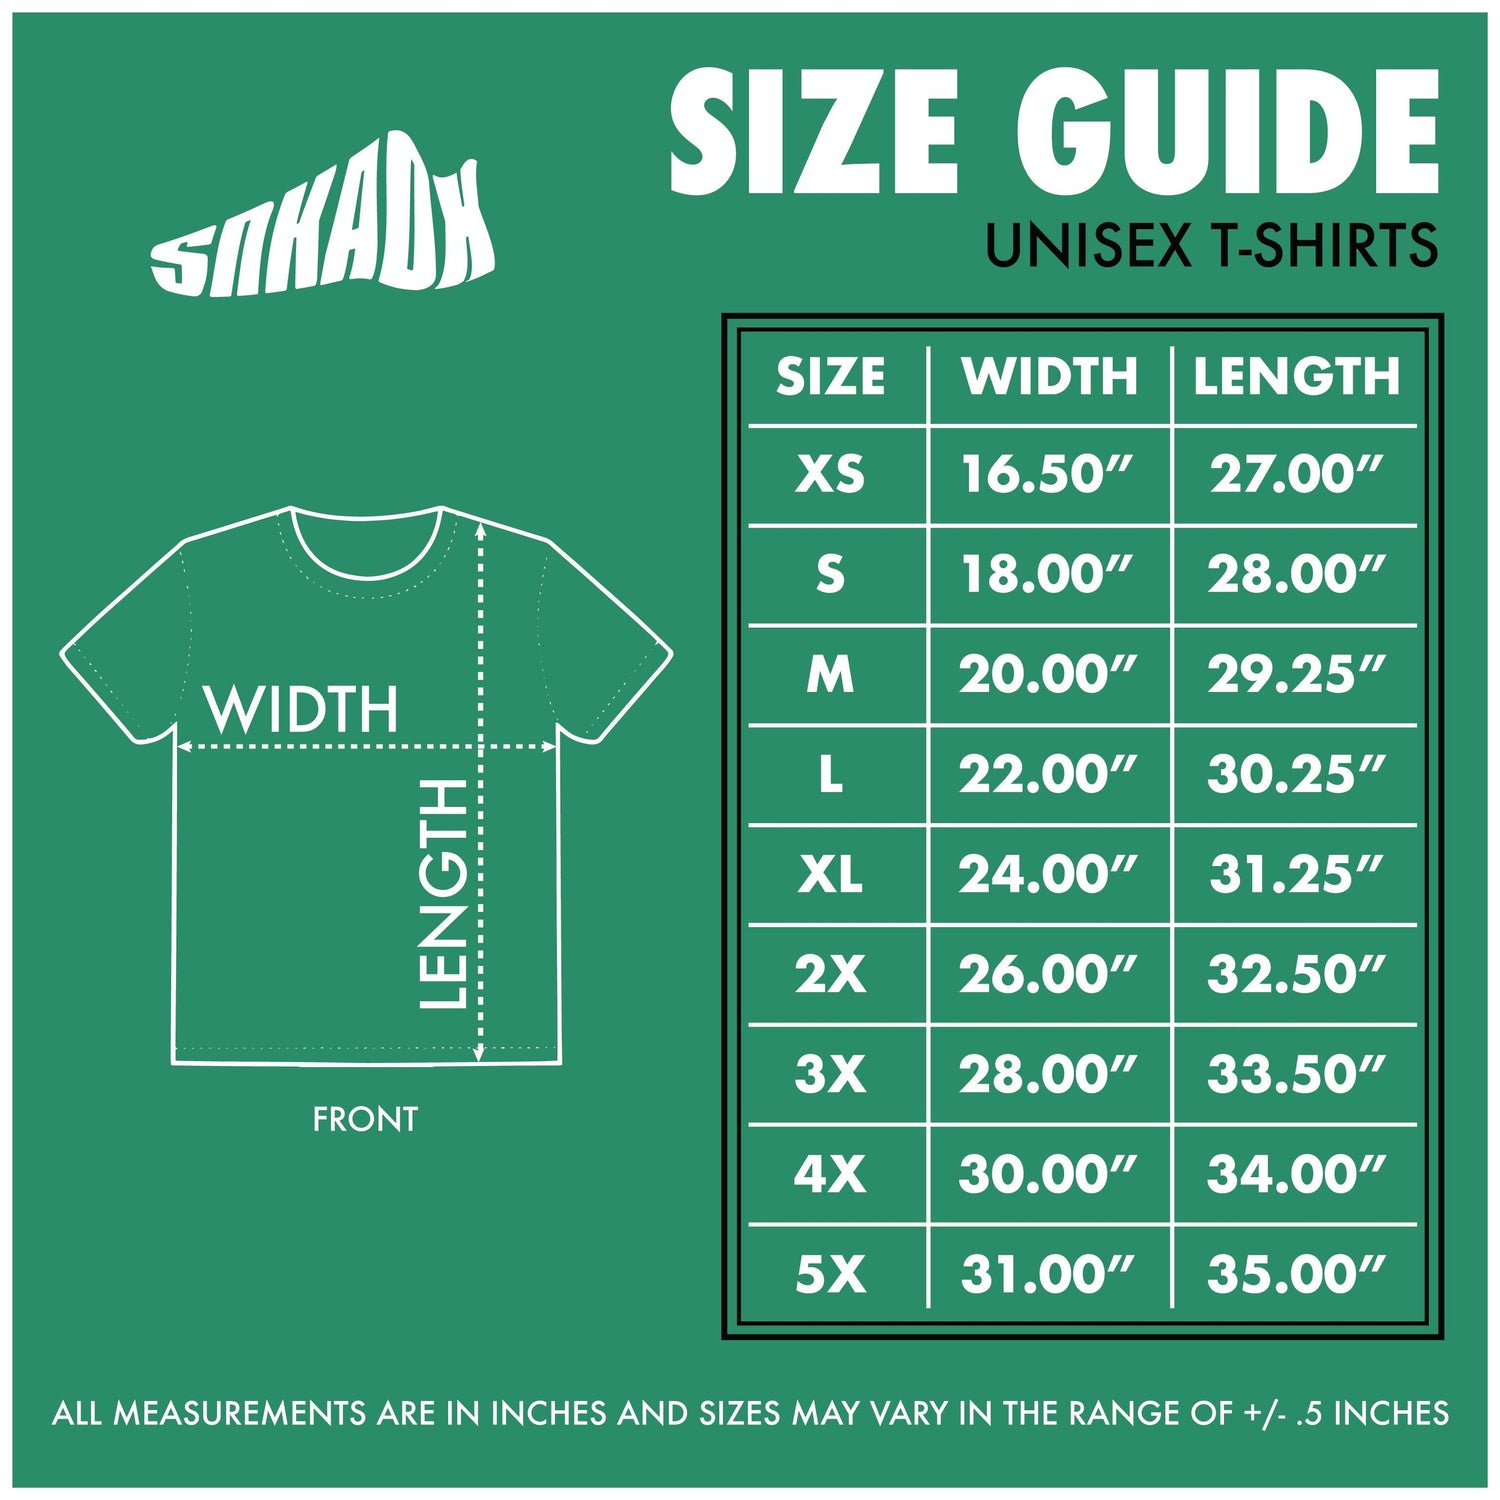 thsirt size guide